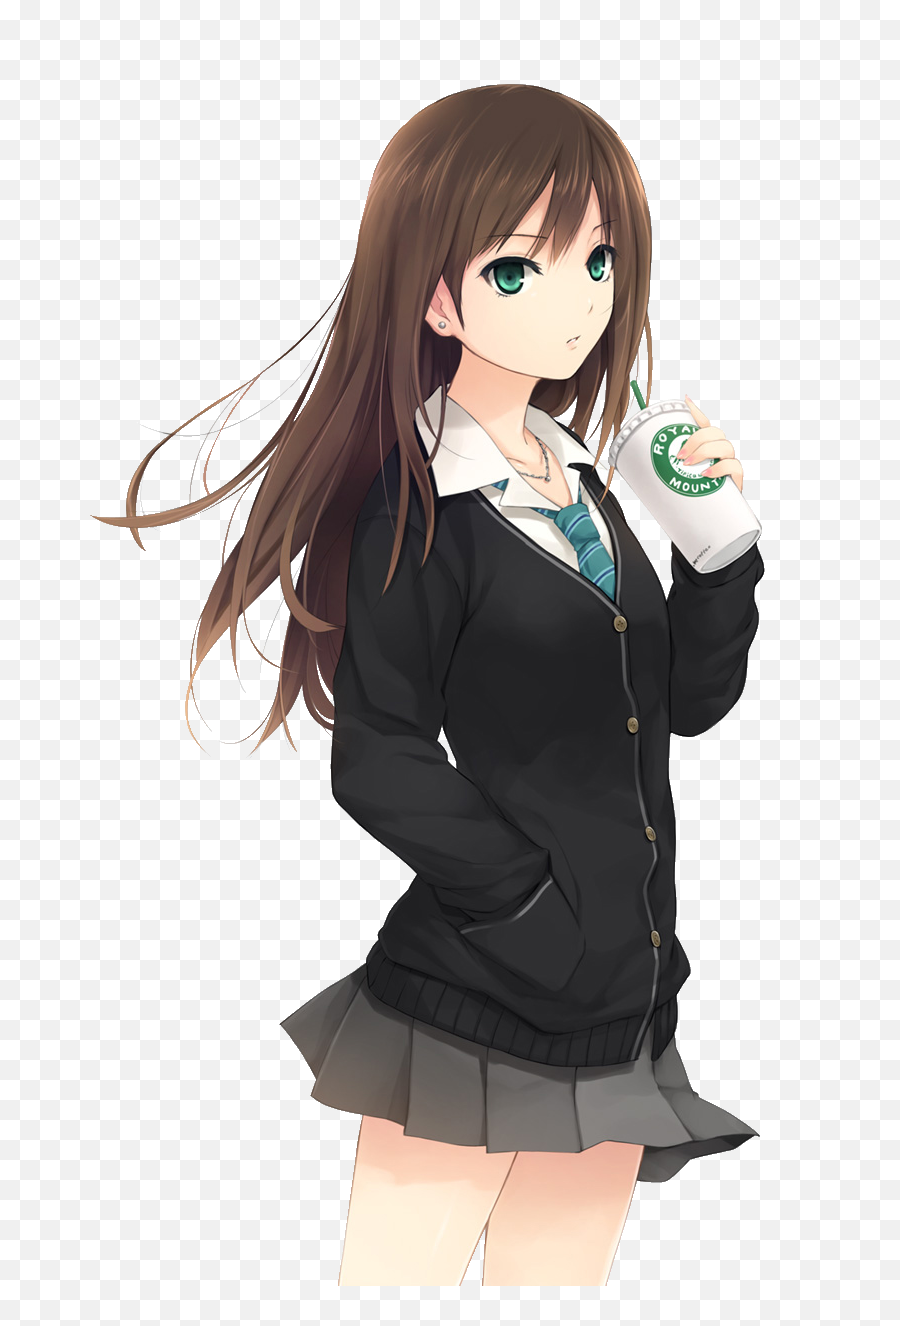 Anime Girl With Brown Hair Png 2 - Brown Hair Female Anime Characters,Anime  Hair Transparent - free transparent png images 